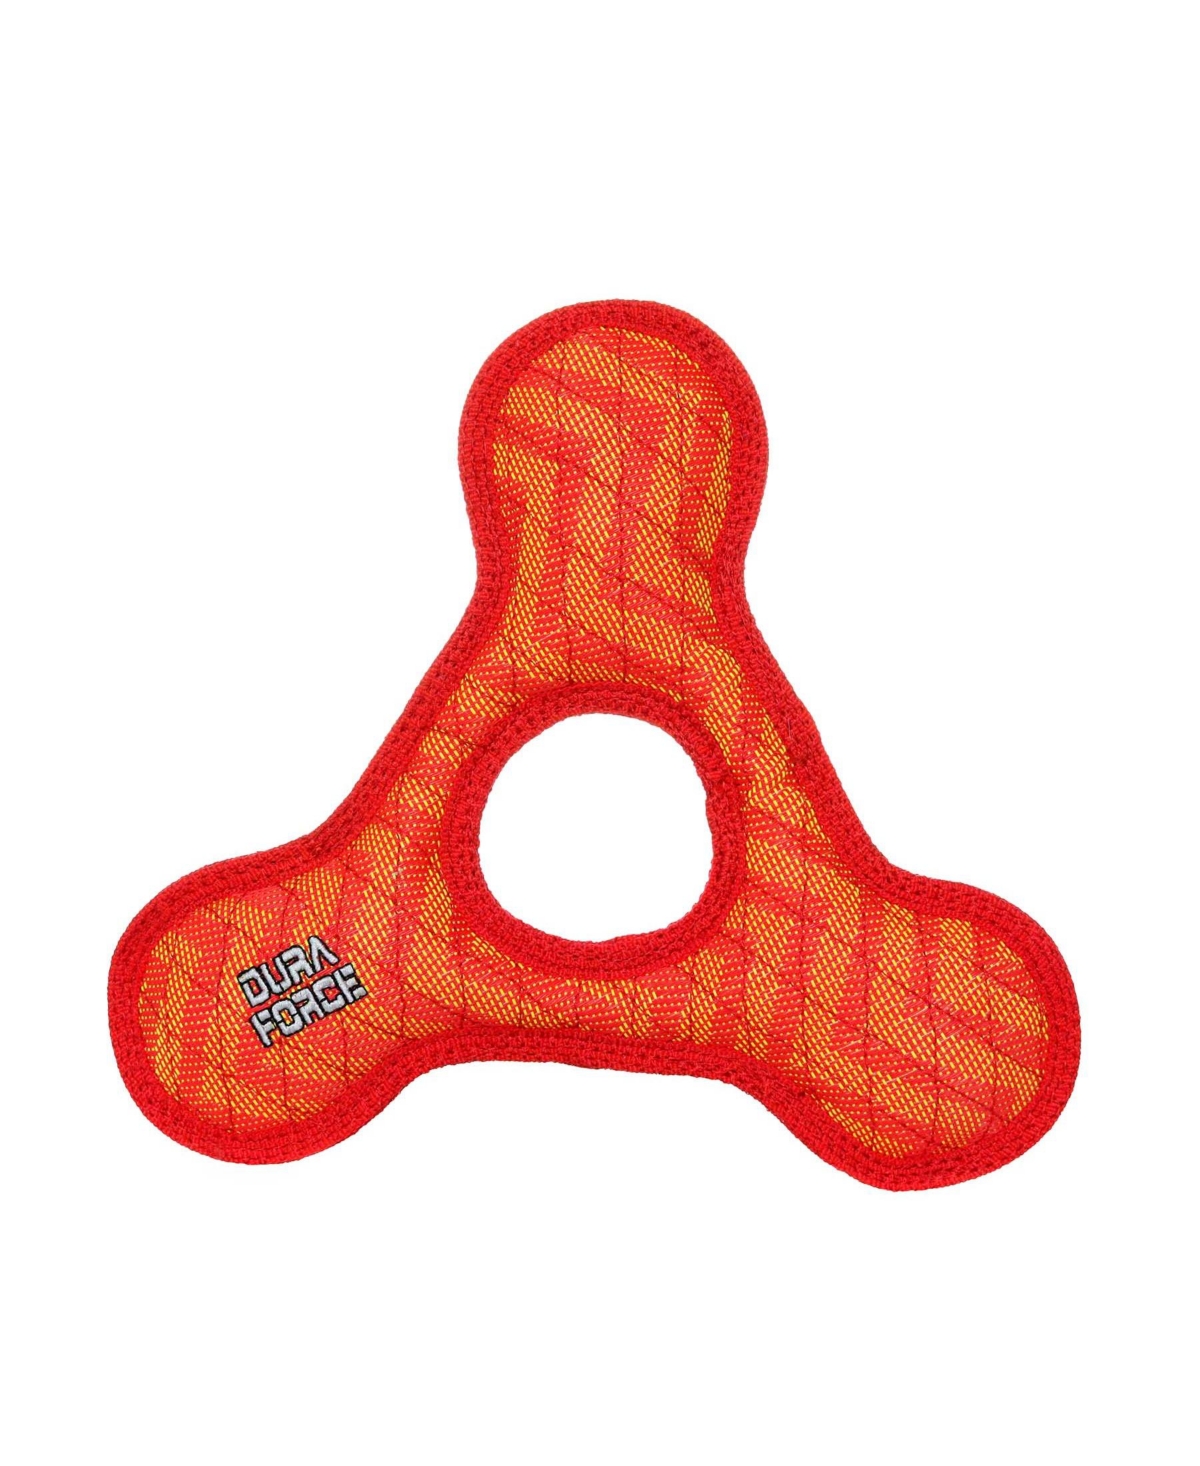 TriangleRing ZigZag Red-Red, Dog Toy - Bright Red